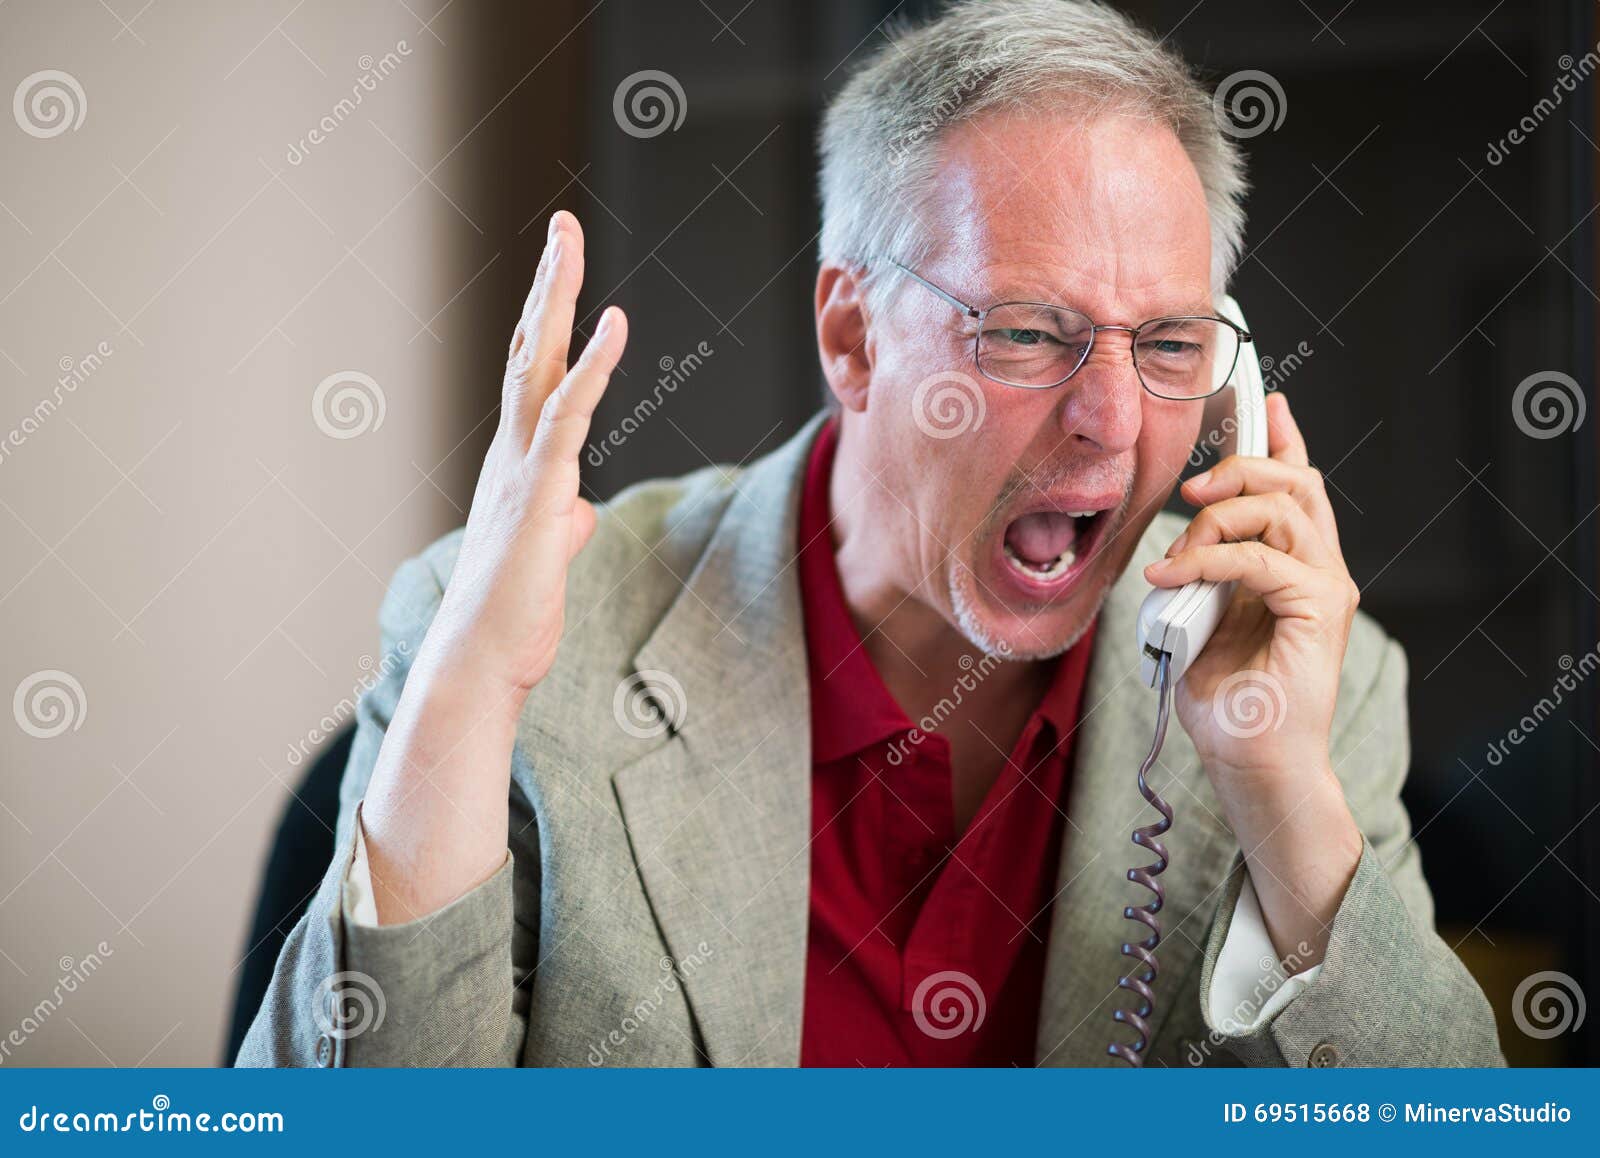 angry man yelling on the phone